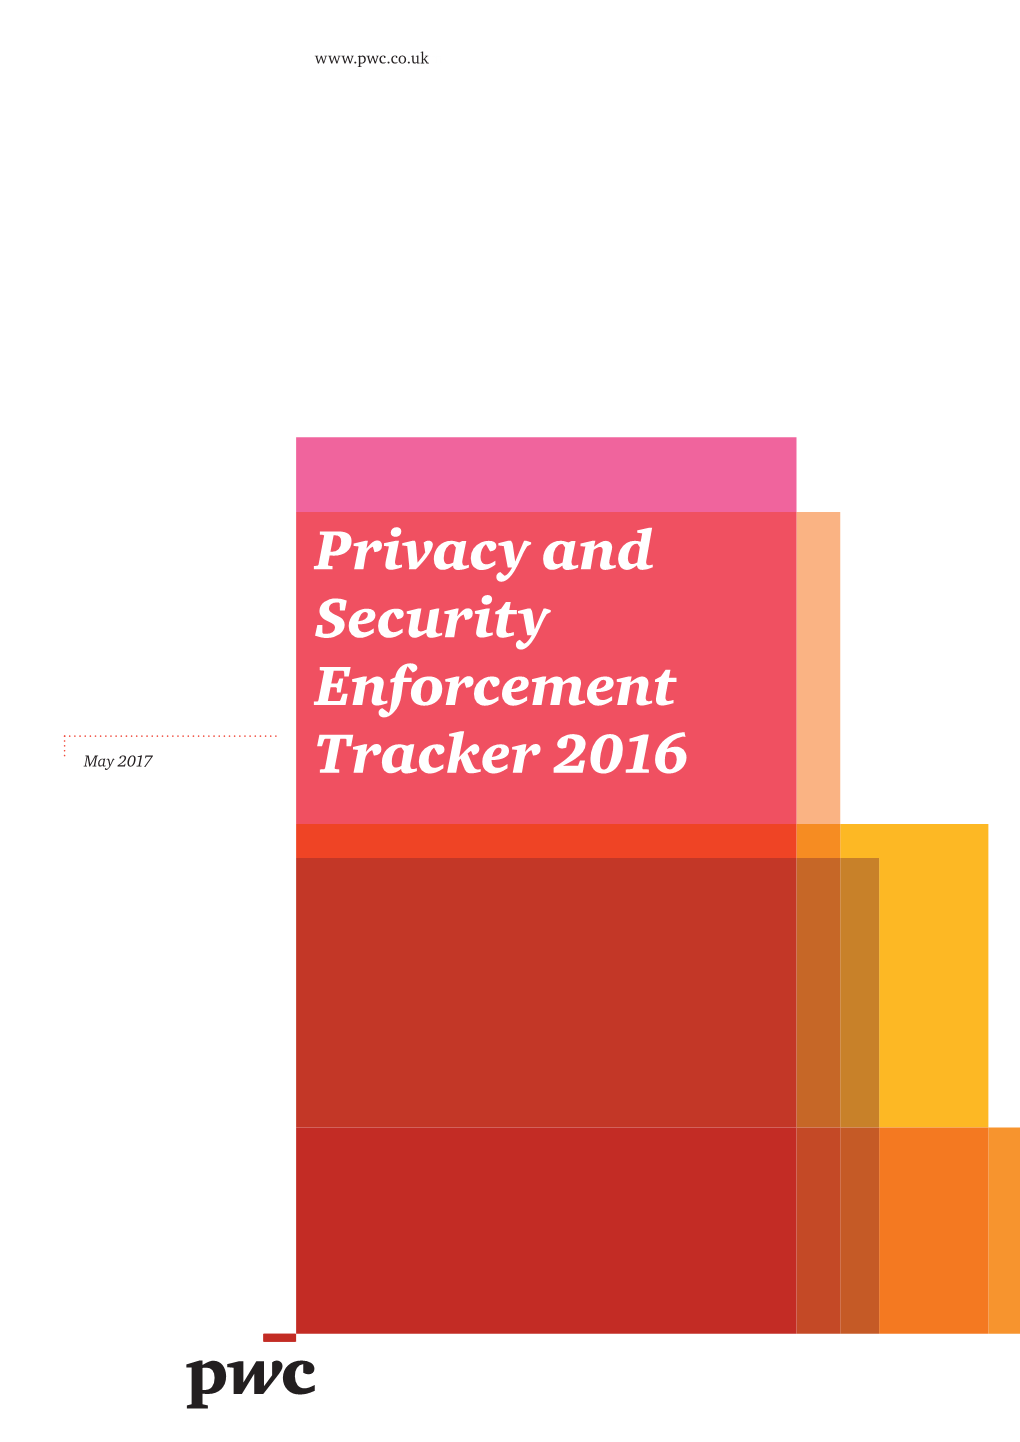 Privacy and Security Enforcement Tracker 2016